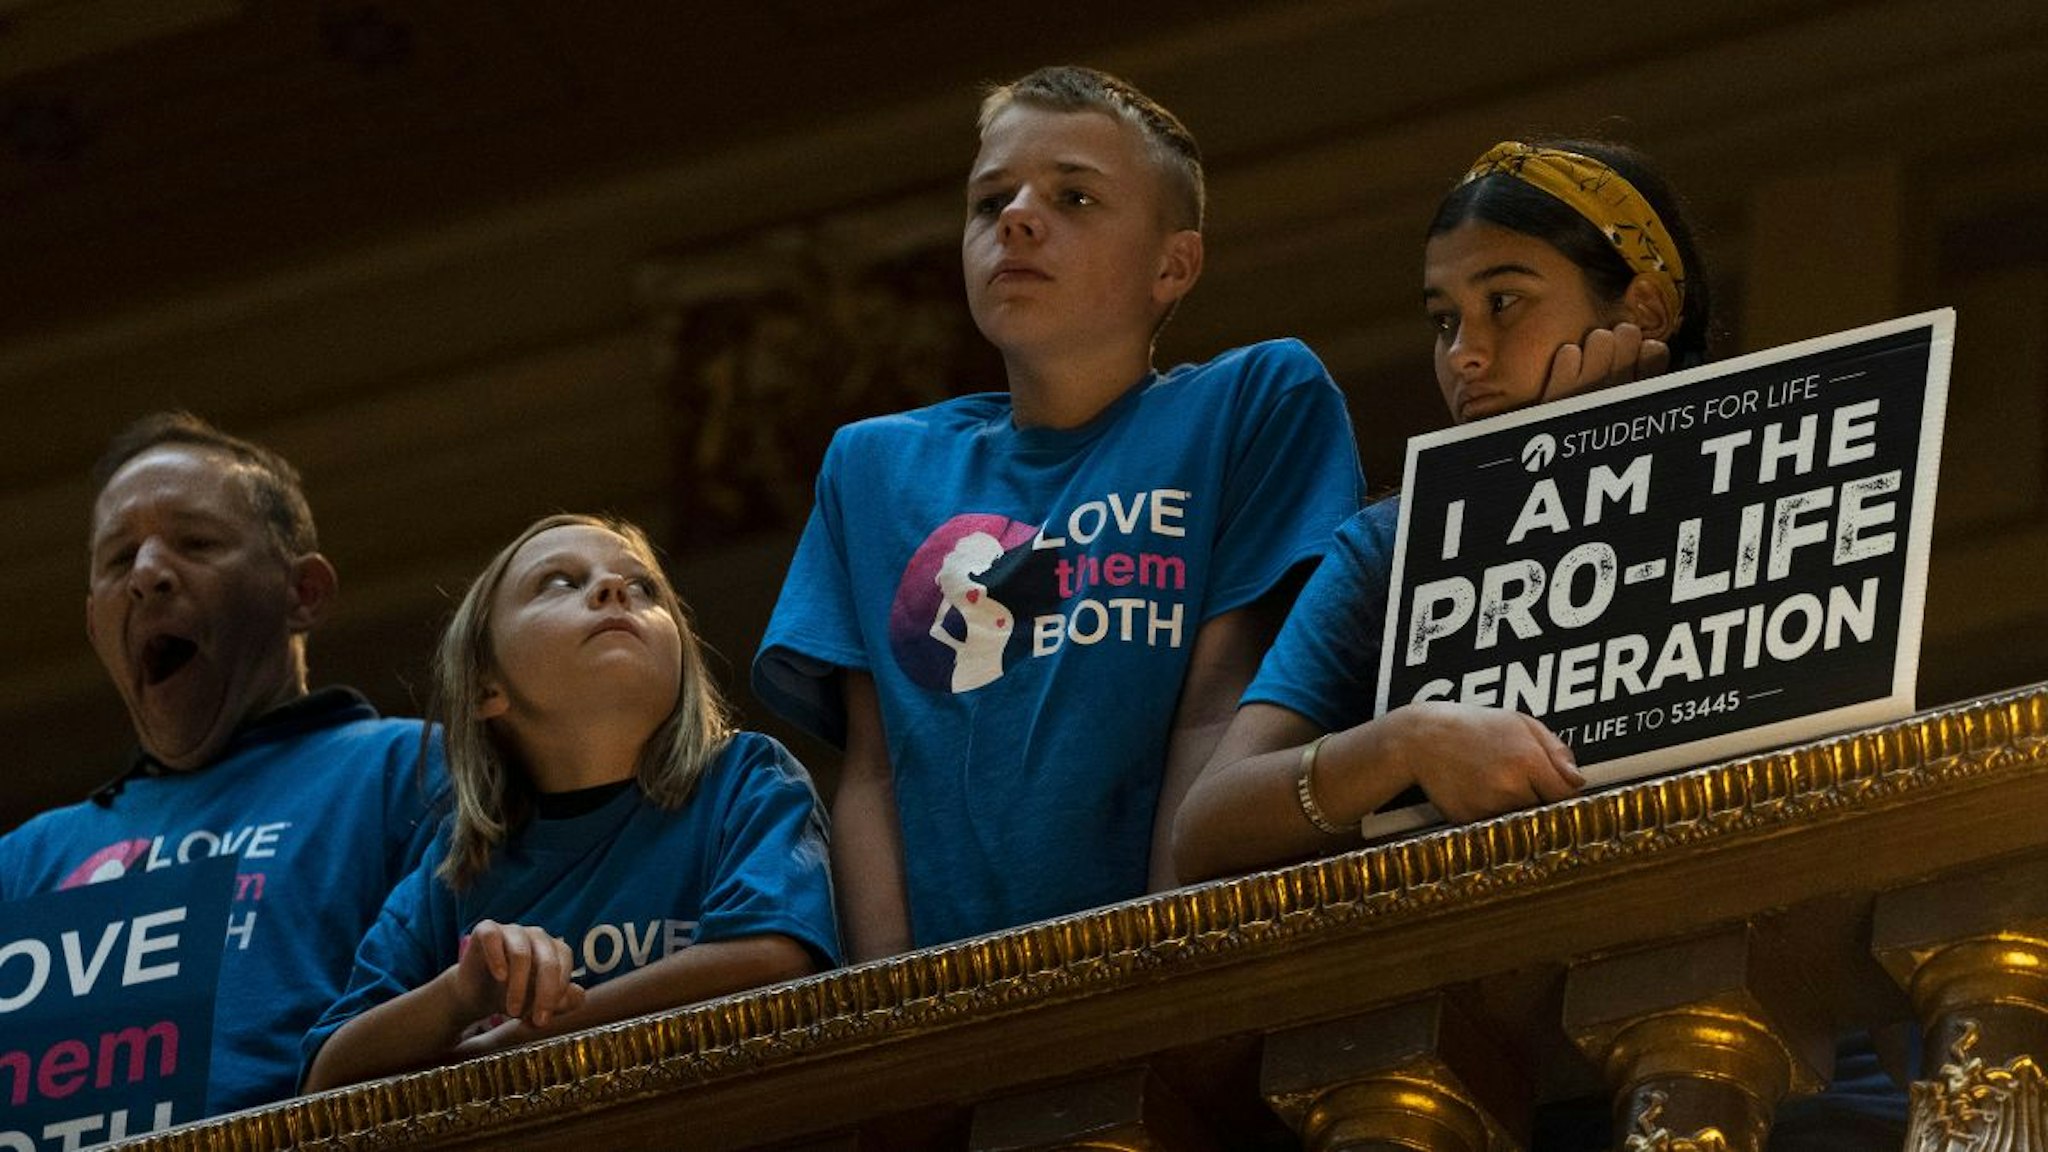 Anti-abortion demonstrators protest during a special session of the Indiana State Senate at the Capitol building in Indianapolis, Indiana, US, on Tuesday, July 26, 2022.